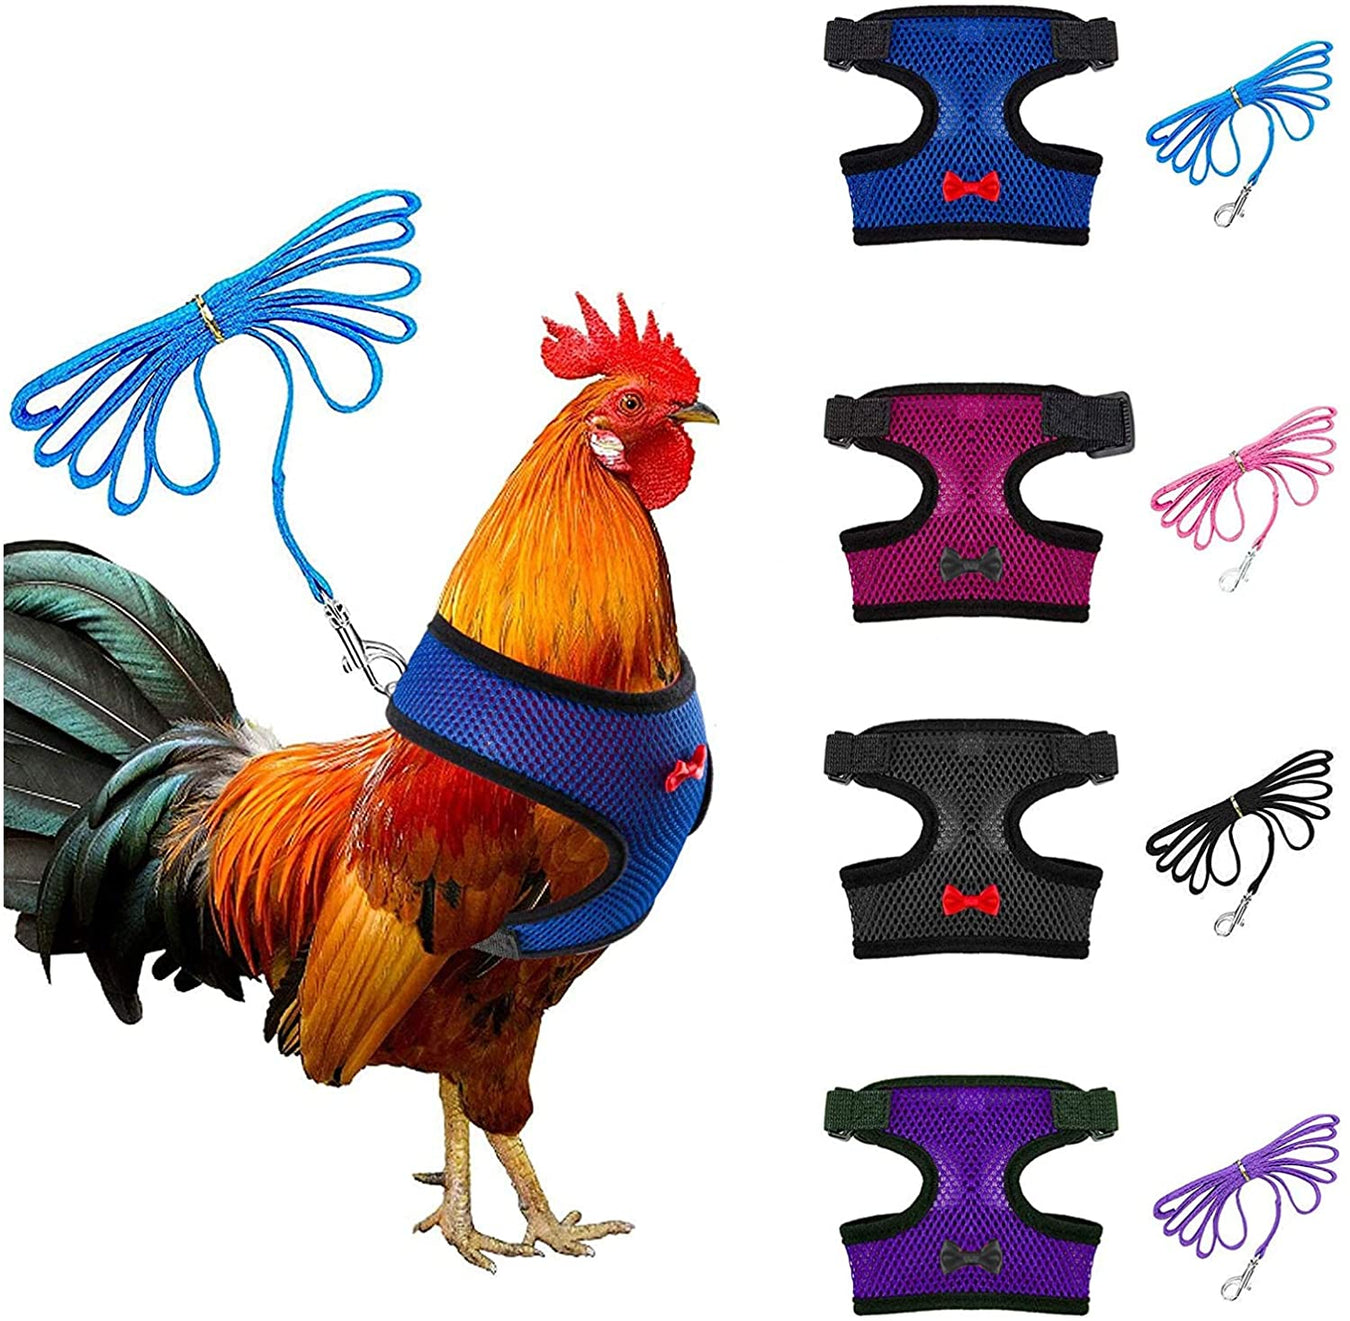 POULTRY: WEARABLES